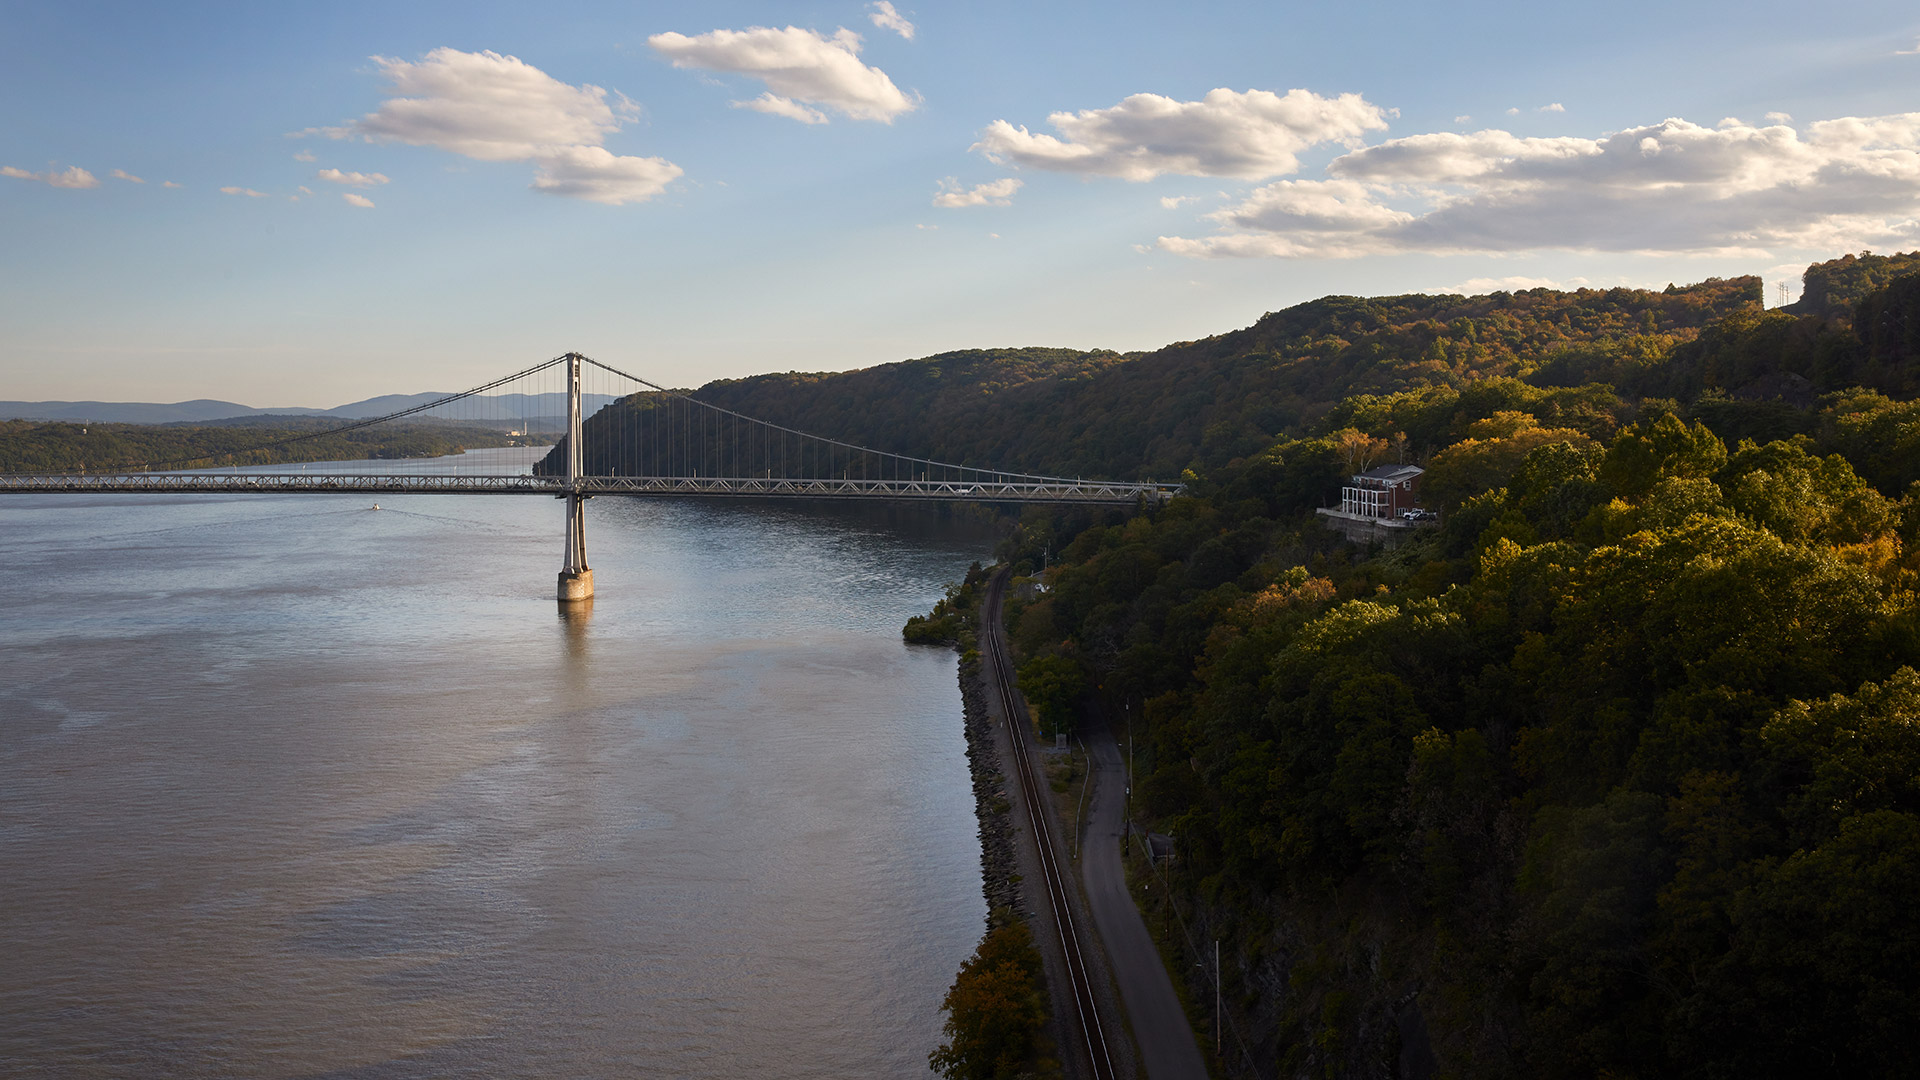 Mountains, Galleries and Local Eats: A Weekend Guide to New York’s Hudson Valley